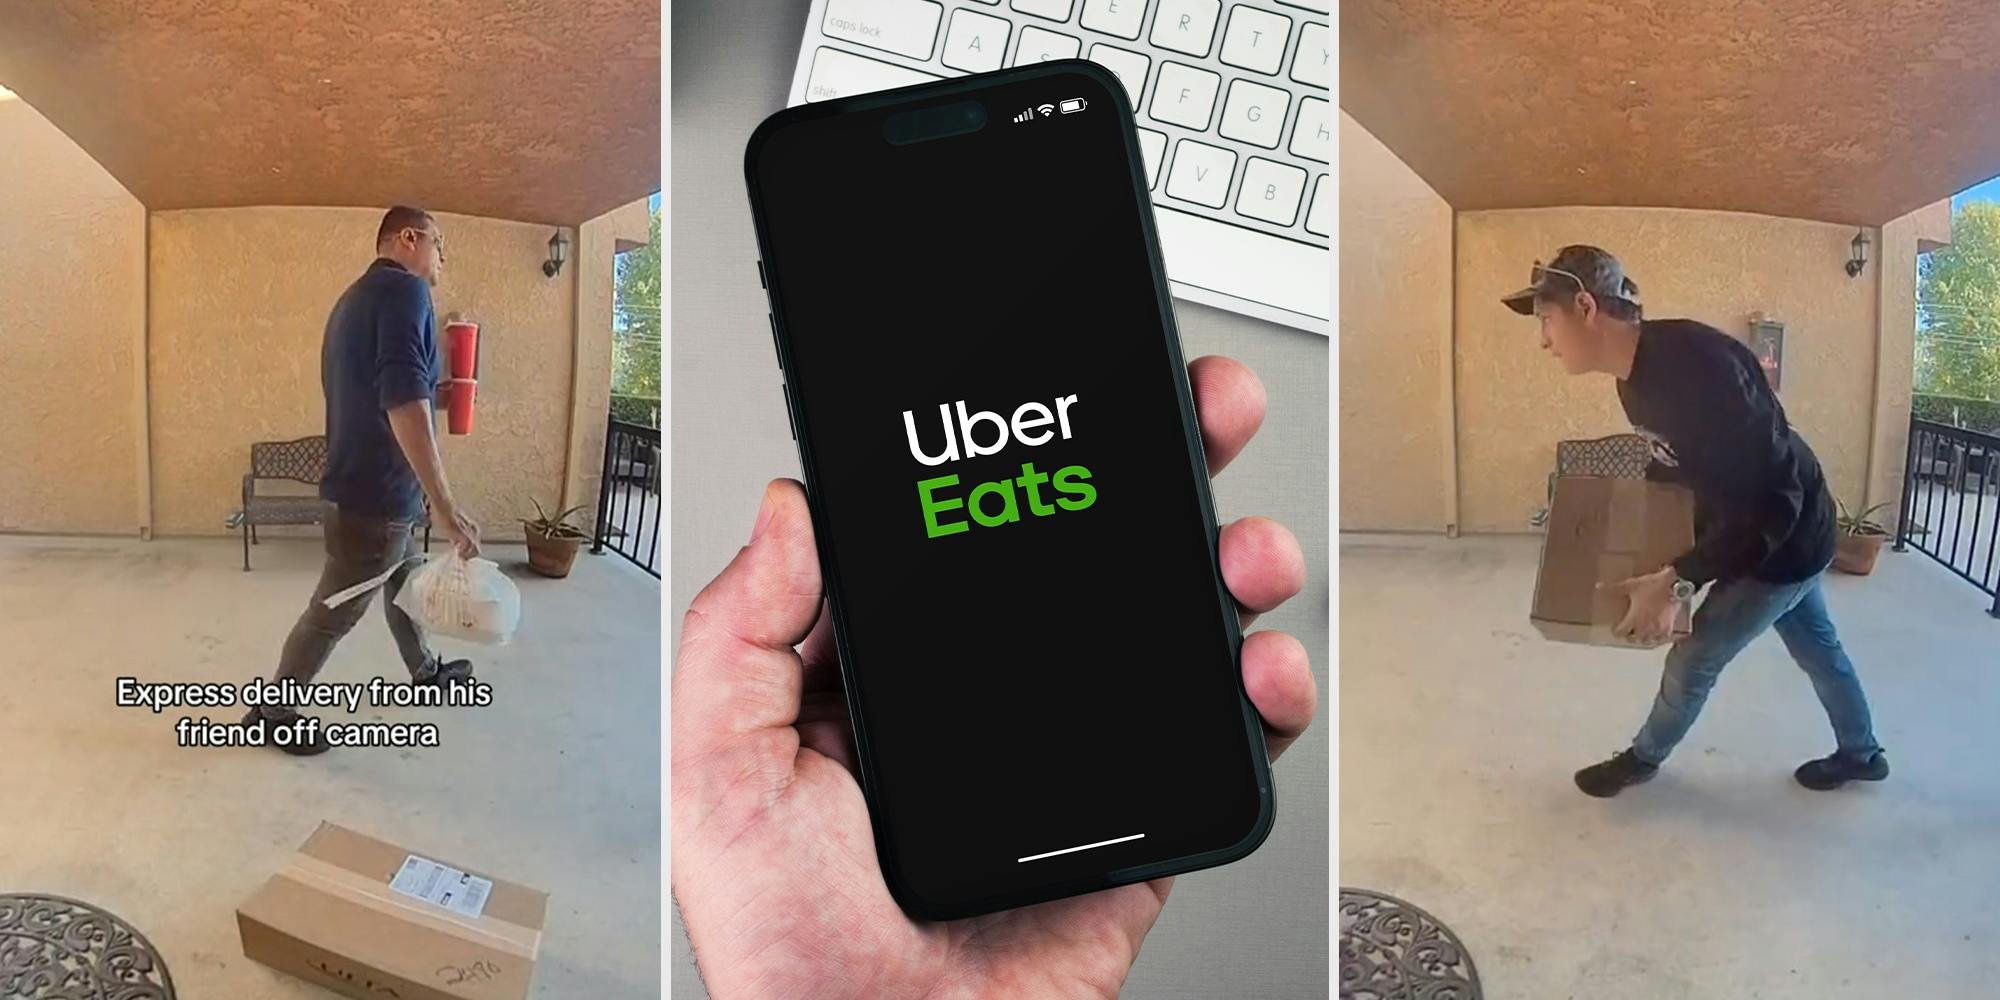 Uber Eats customer says she caught driver plotting to take her $500 Dyson Airwrap